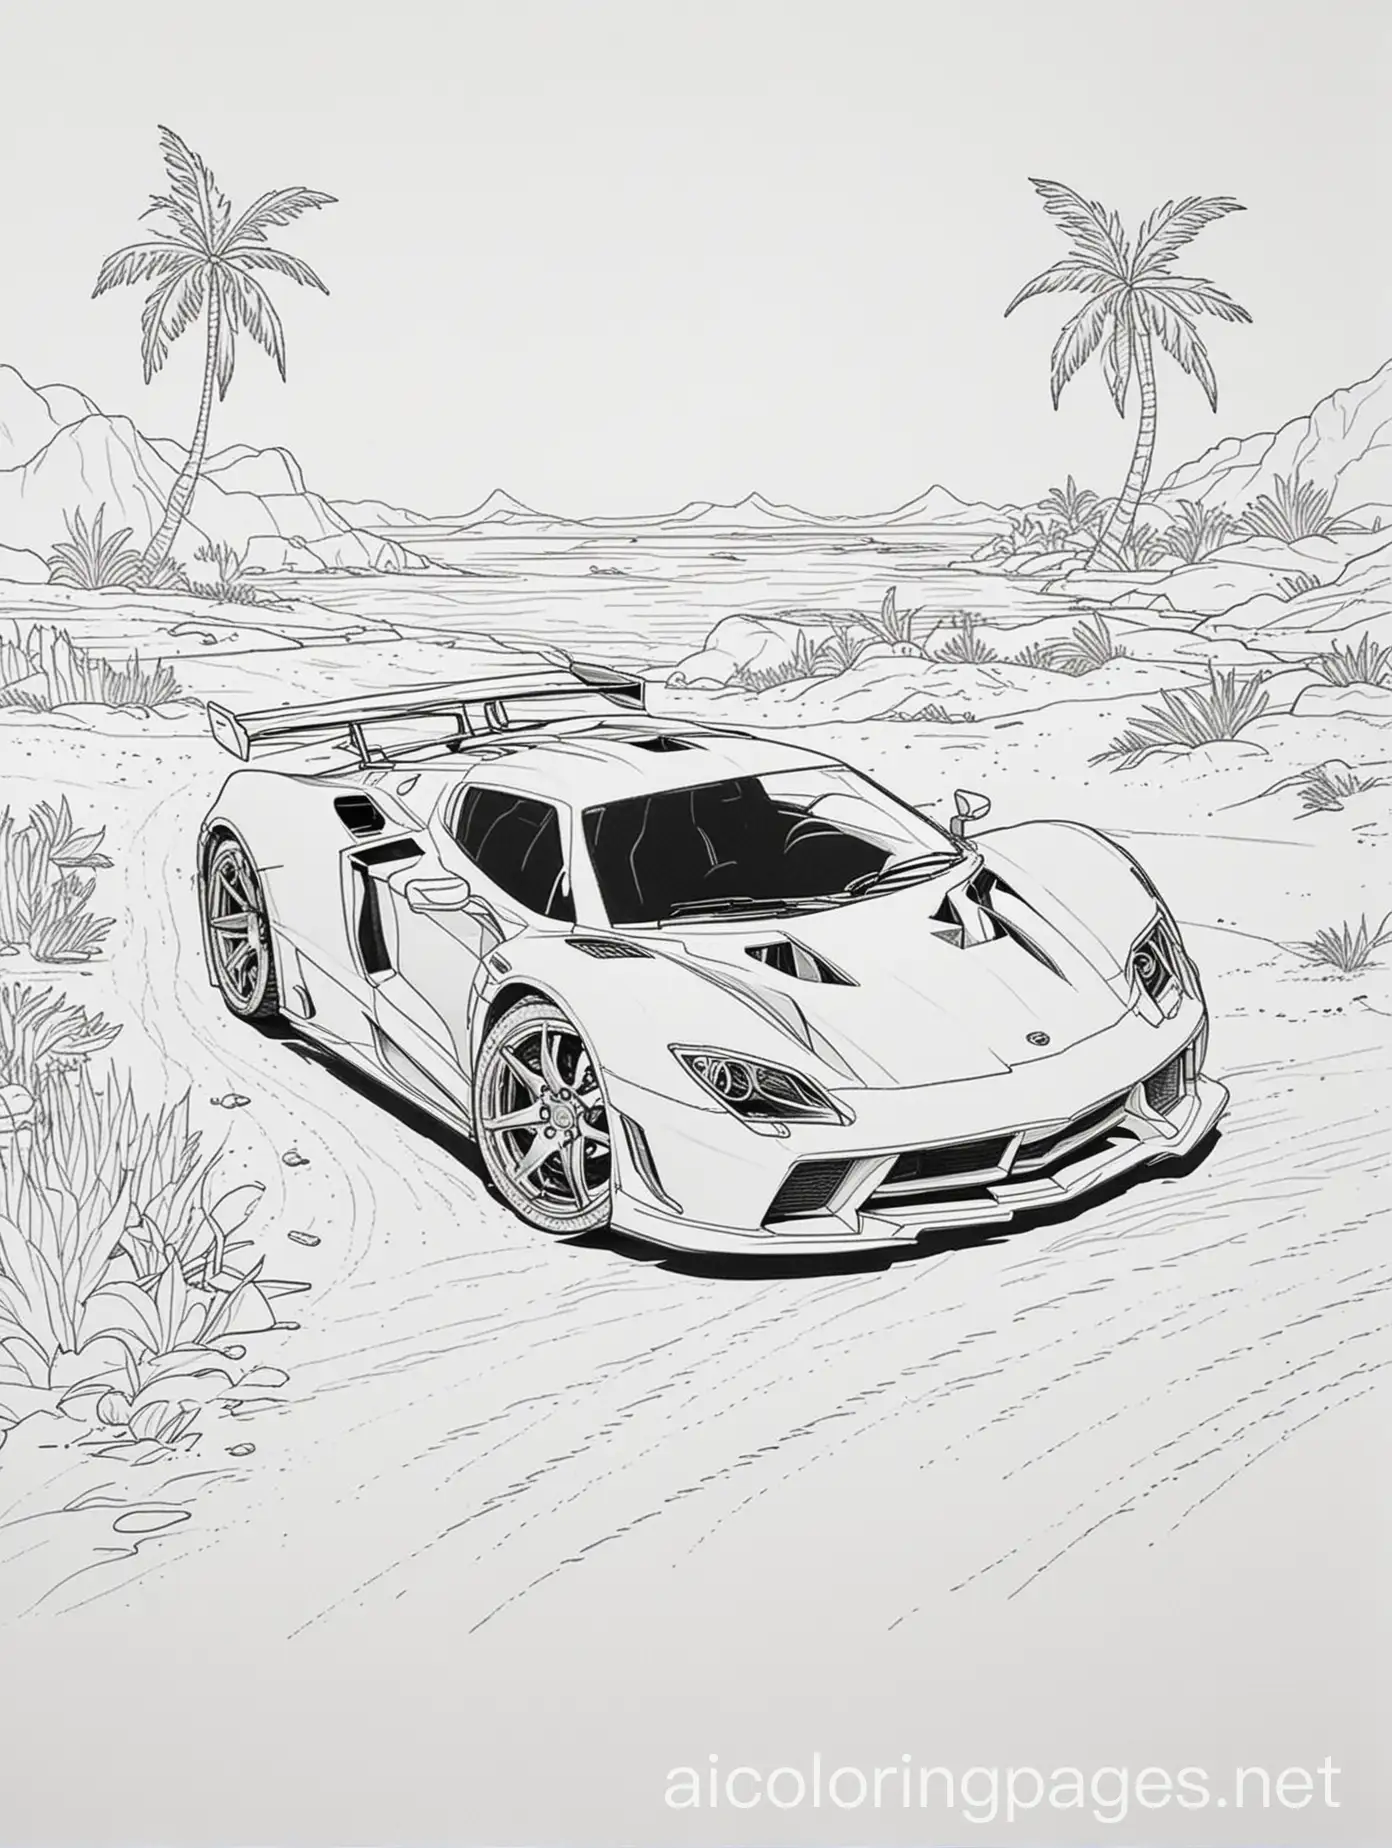 sportcar on deserted island, Coloring Page, black and white, line art, white background, Simplicity, Ample White Space. The background of the coloring page is plain white to make it easy for young children to color within the lines. The outlines of all the subjects are easy to distinguish, making it simple for kids to color without too much difficulty, Coloring Page, black and white, line art, white background, Simplicity, Ample White Space. The background of the coloring page is plain white to make it easy for young children to color within the lines. The outlines of all the subjects are easy to distinguish, making it simple for kids to color without too much difficulty